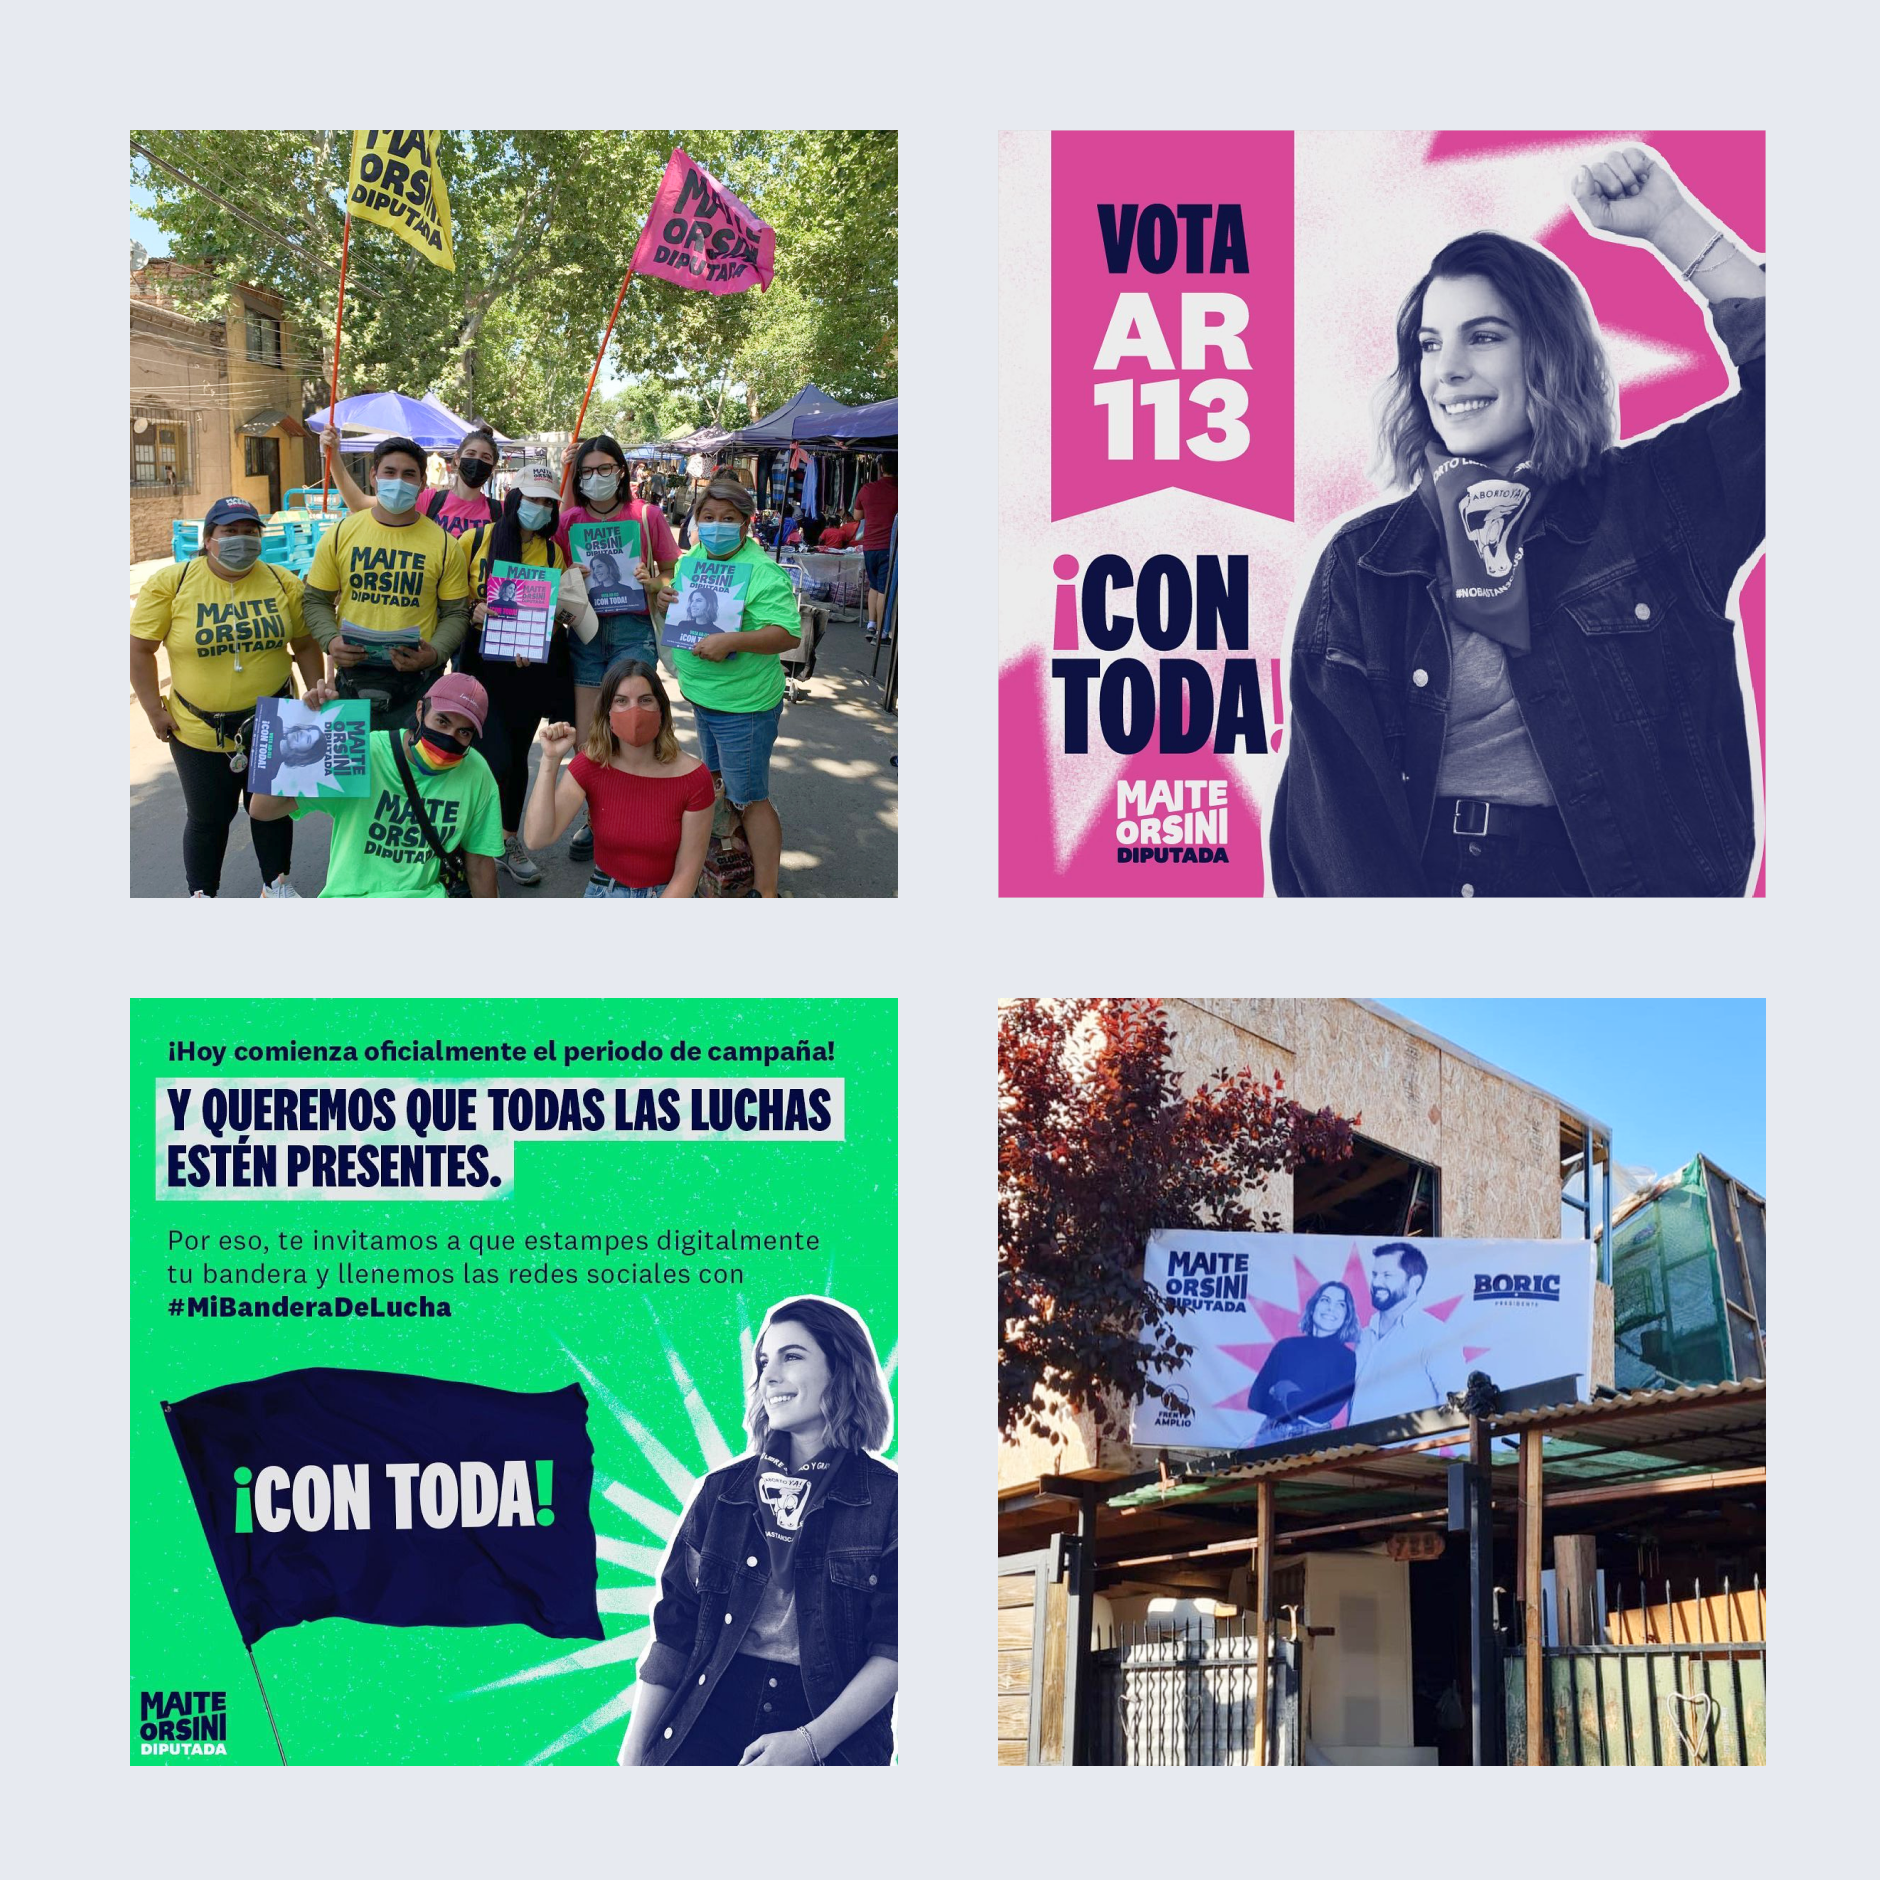 Grid of images showing the branding on signs and merch along with posters